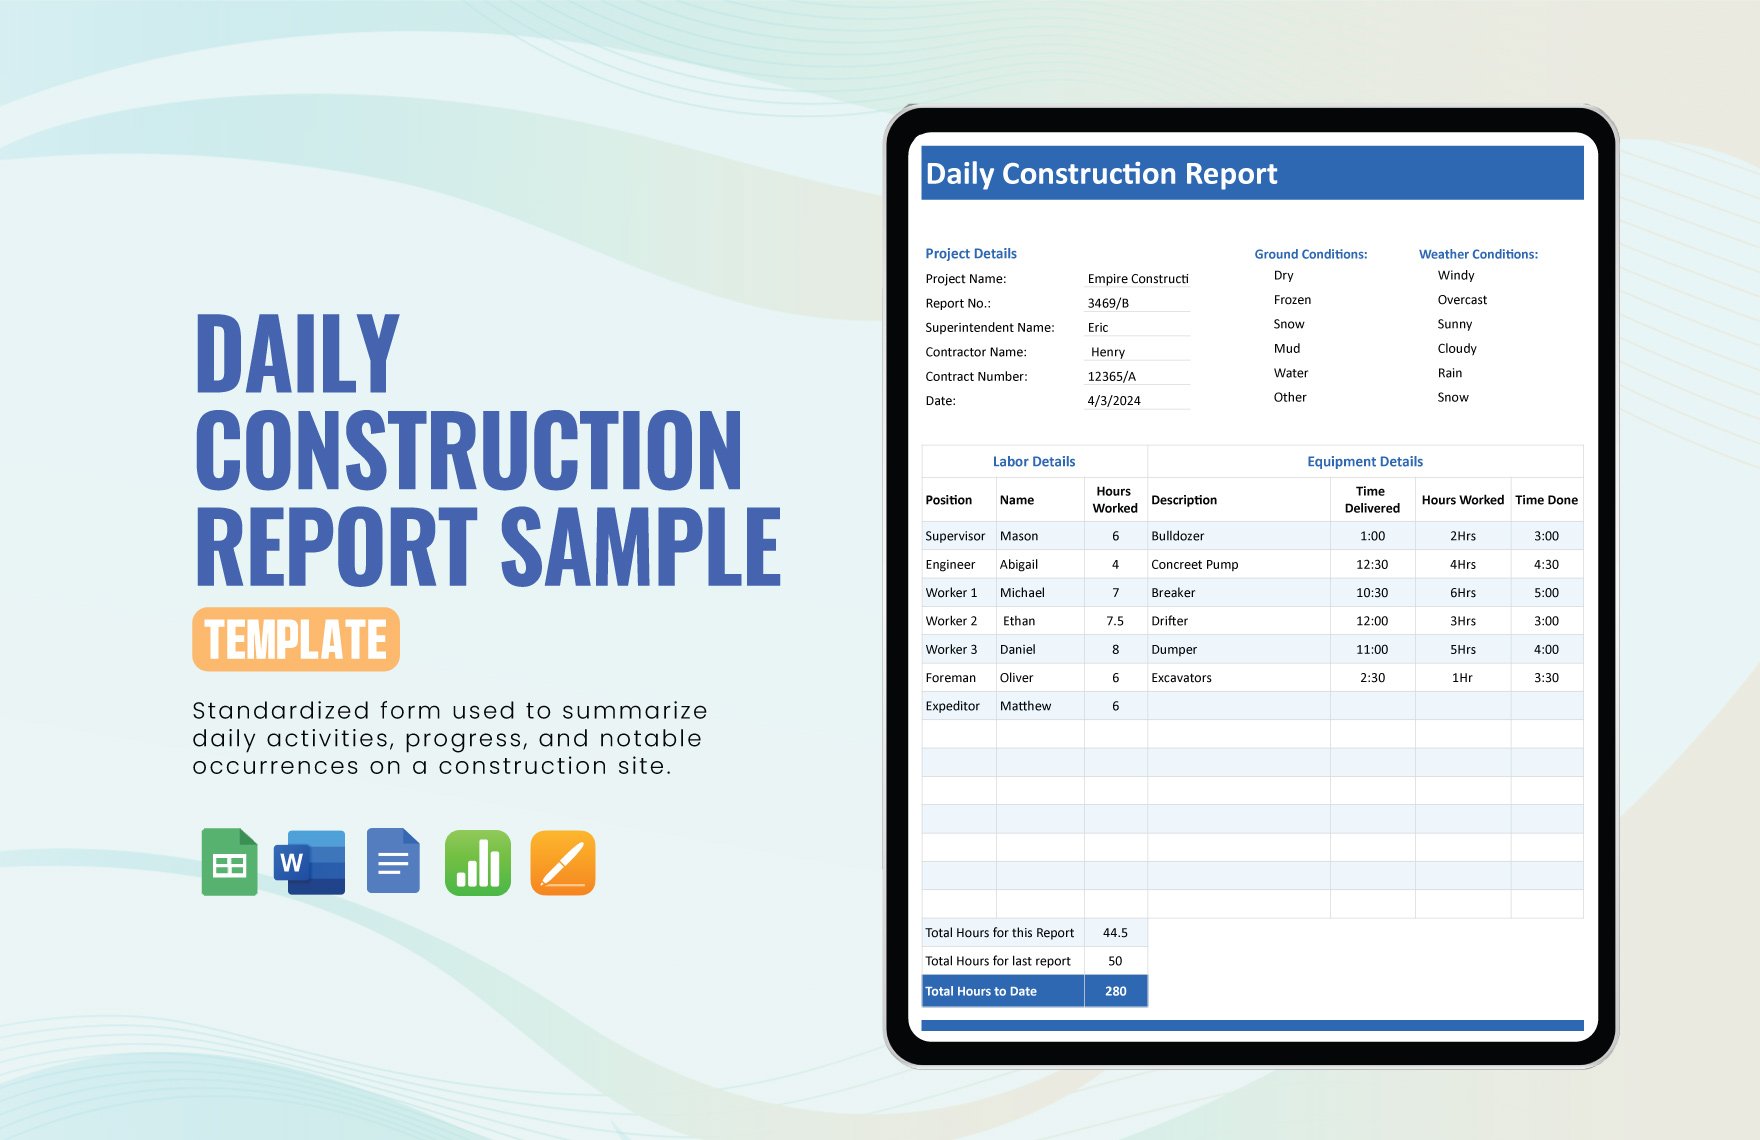 Daily Construction Report Sample in Word, Google Docs, Google Sheets, Apple Pages, Apple Numbers